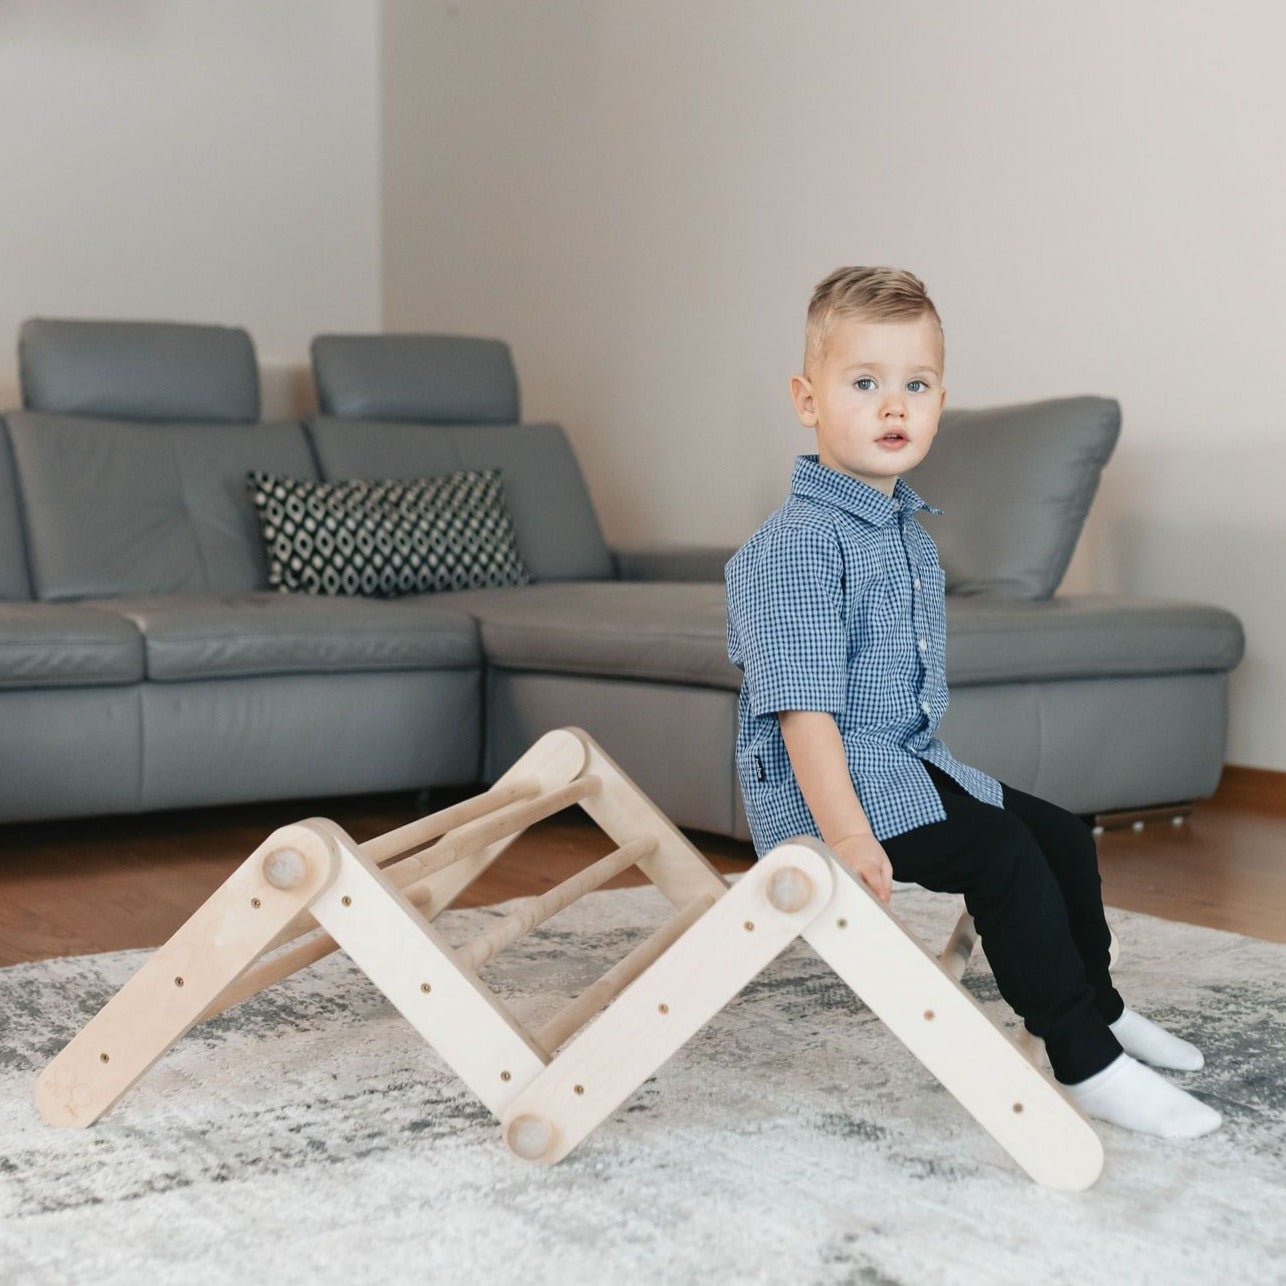 Modifiable climbing frame MOPITRI®, inspired by Emmi Pikler - Ette Tete